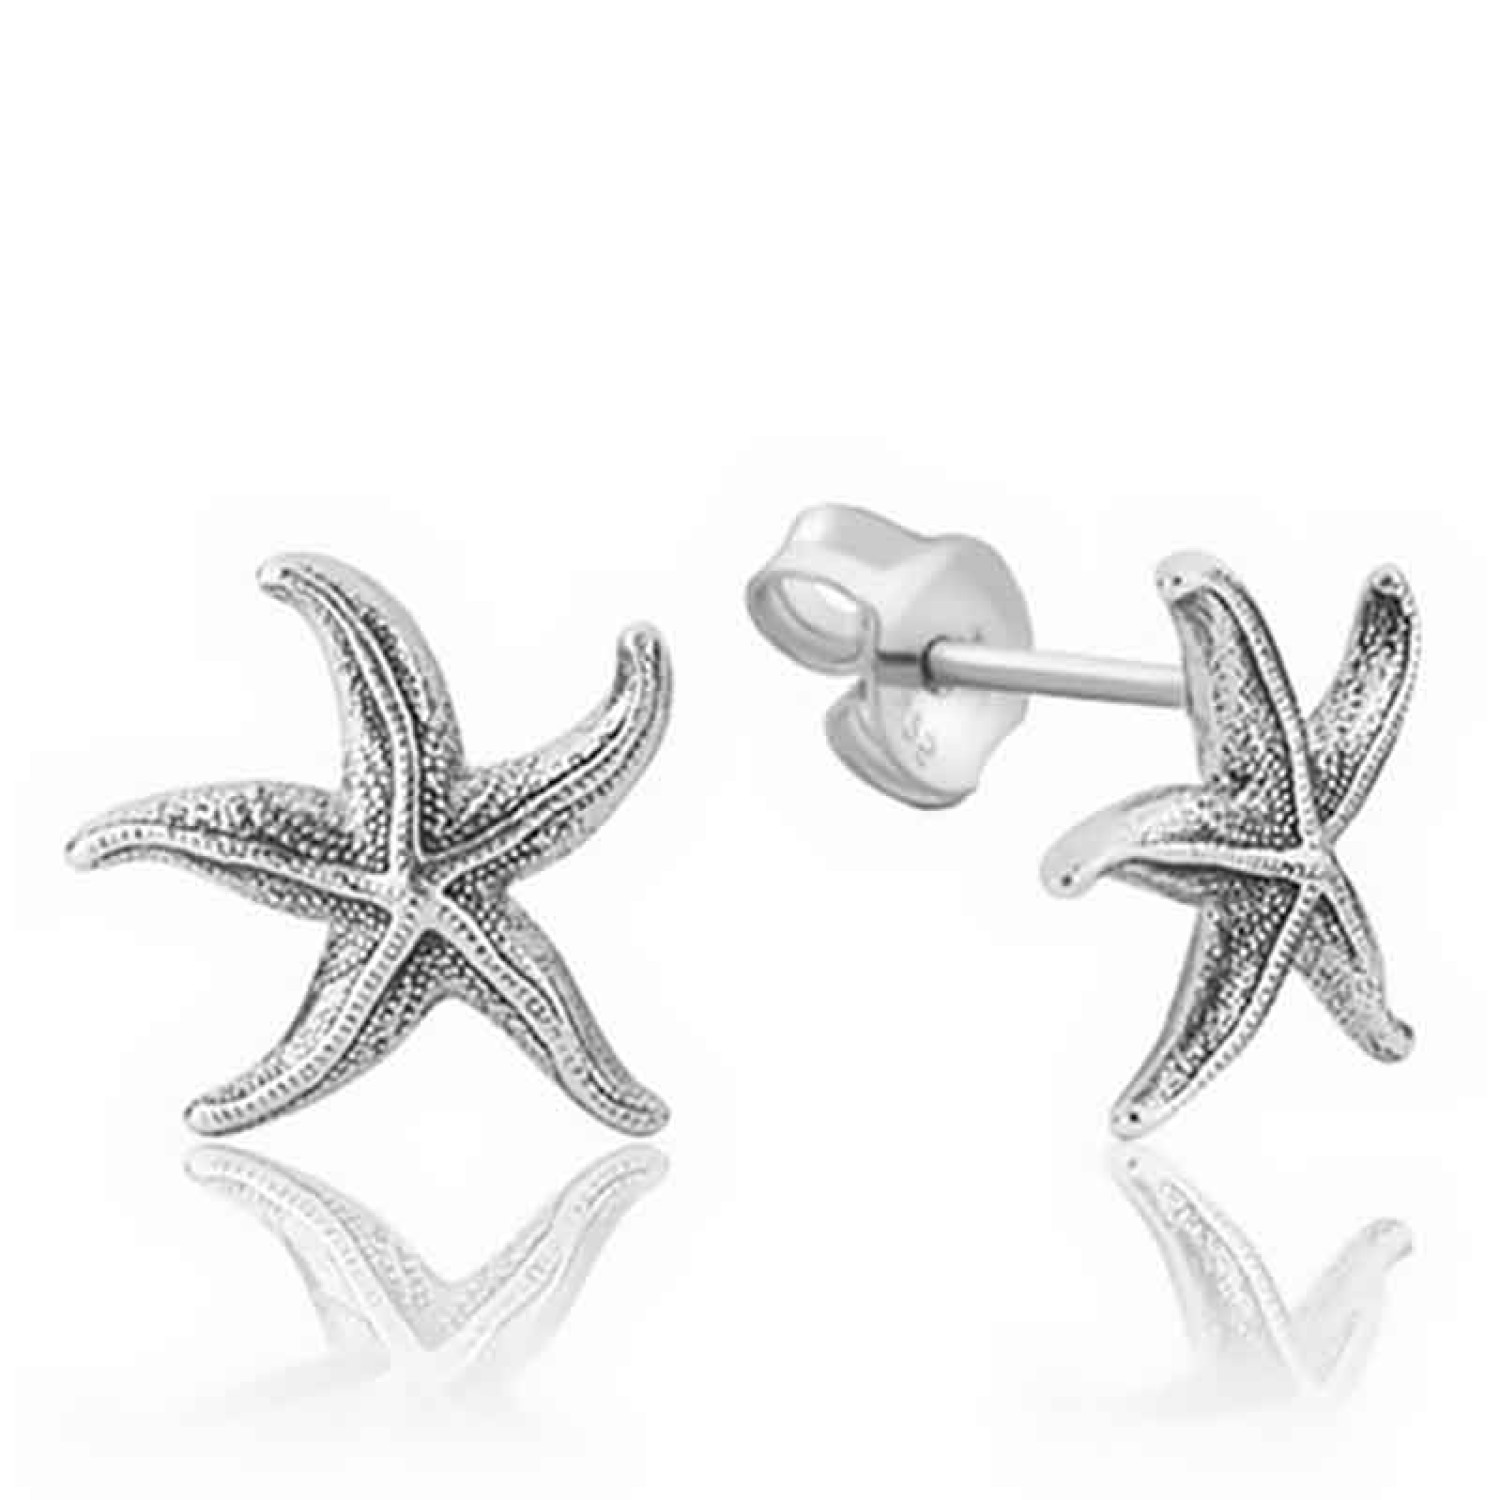 2E61012 Evolve Coastal Starﬁsh Pendant. Evolves beautiful starﬁsh earrings remind us of time spent with loved ones enjoying Aotearoa’s many beautiful beaches. The starﬁsh depicts the magic of true love, celebrating the deep affection and devotion inspired